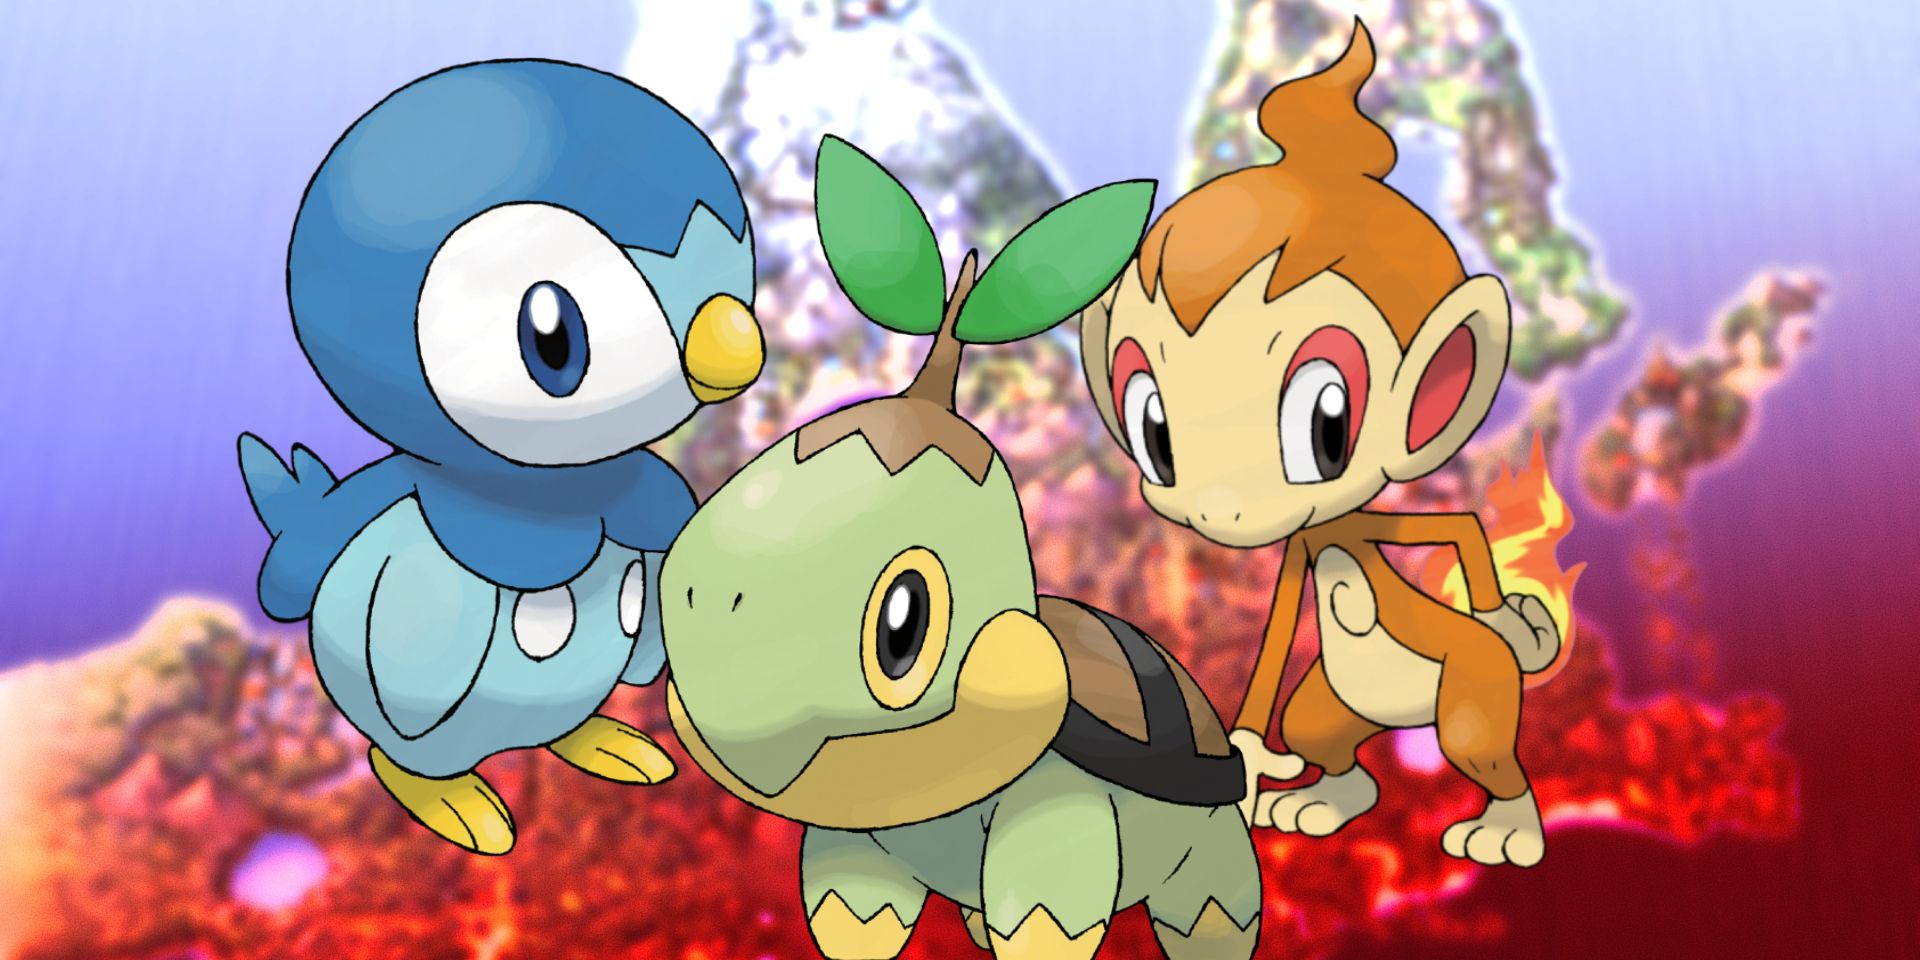 Pokémon may have marched Let’s Go Diamond & Pearl and the reaction is mixed at best